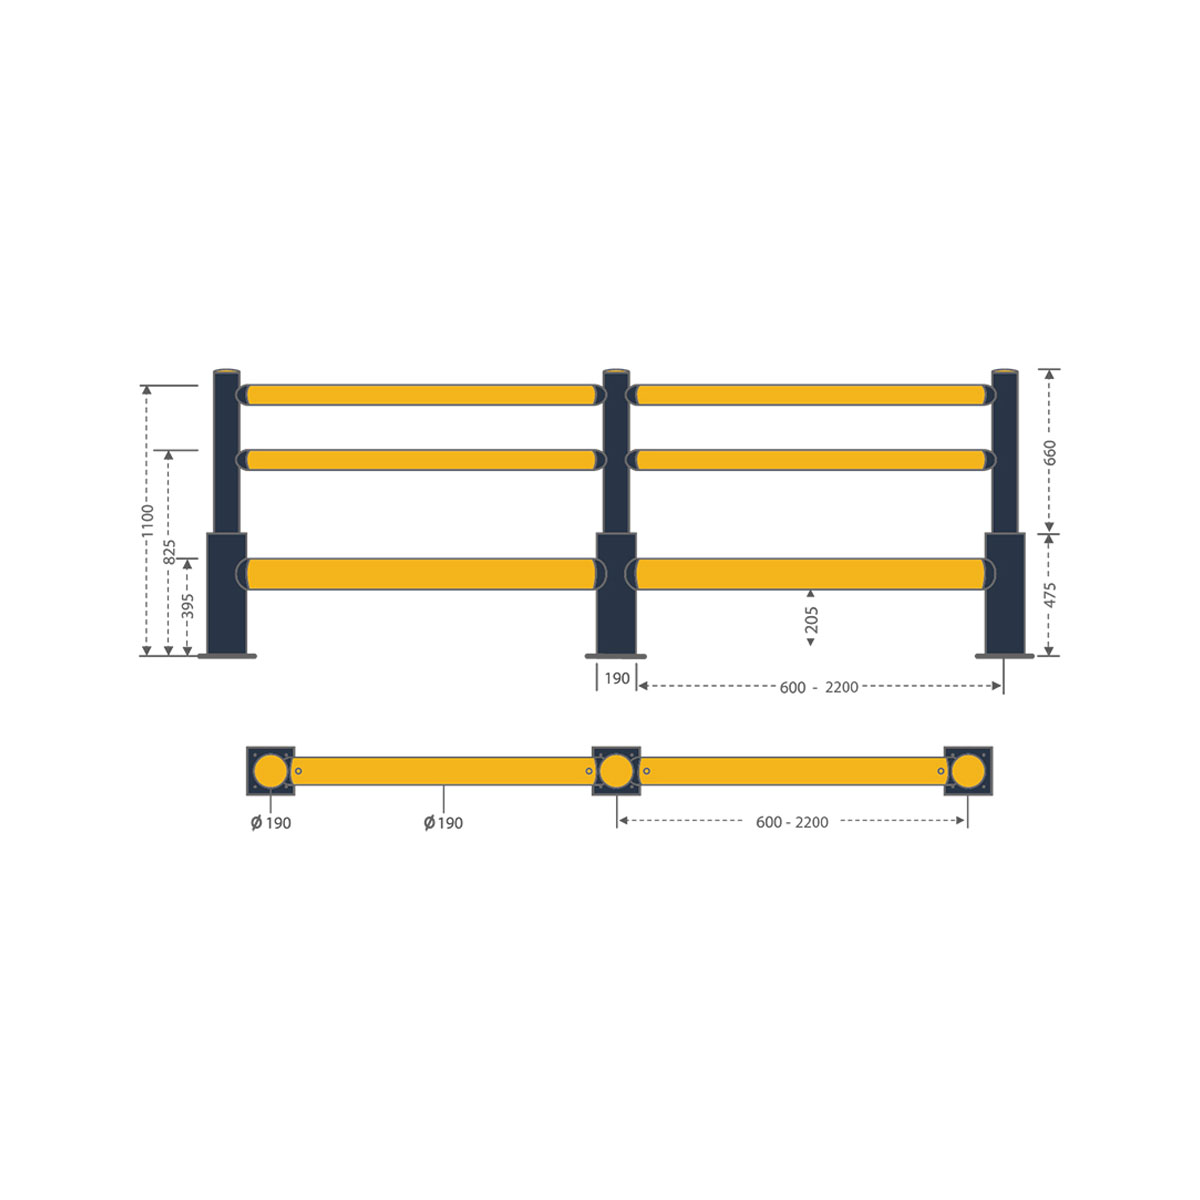 Vehicle Safety Barrier with Pedestrian Barrier Dimensions